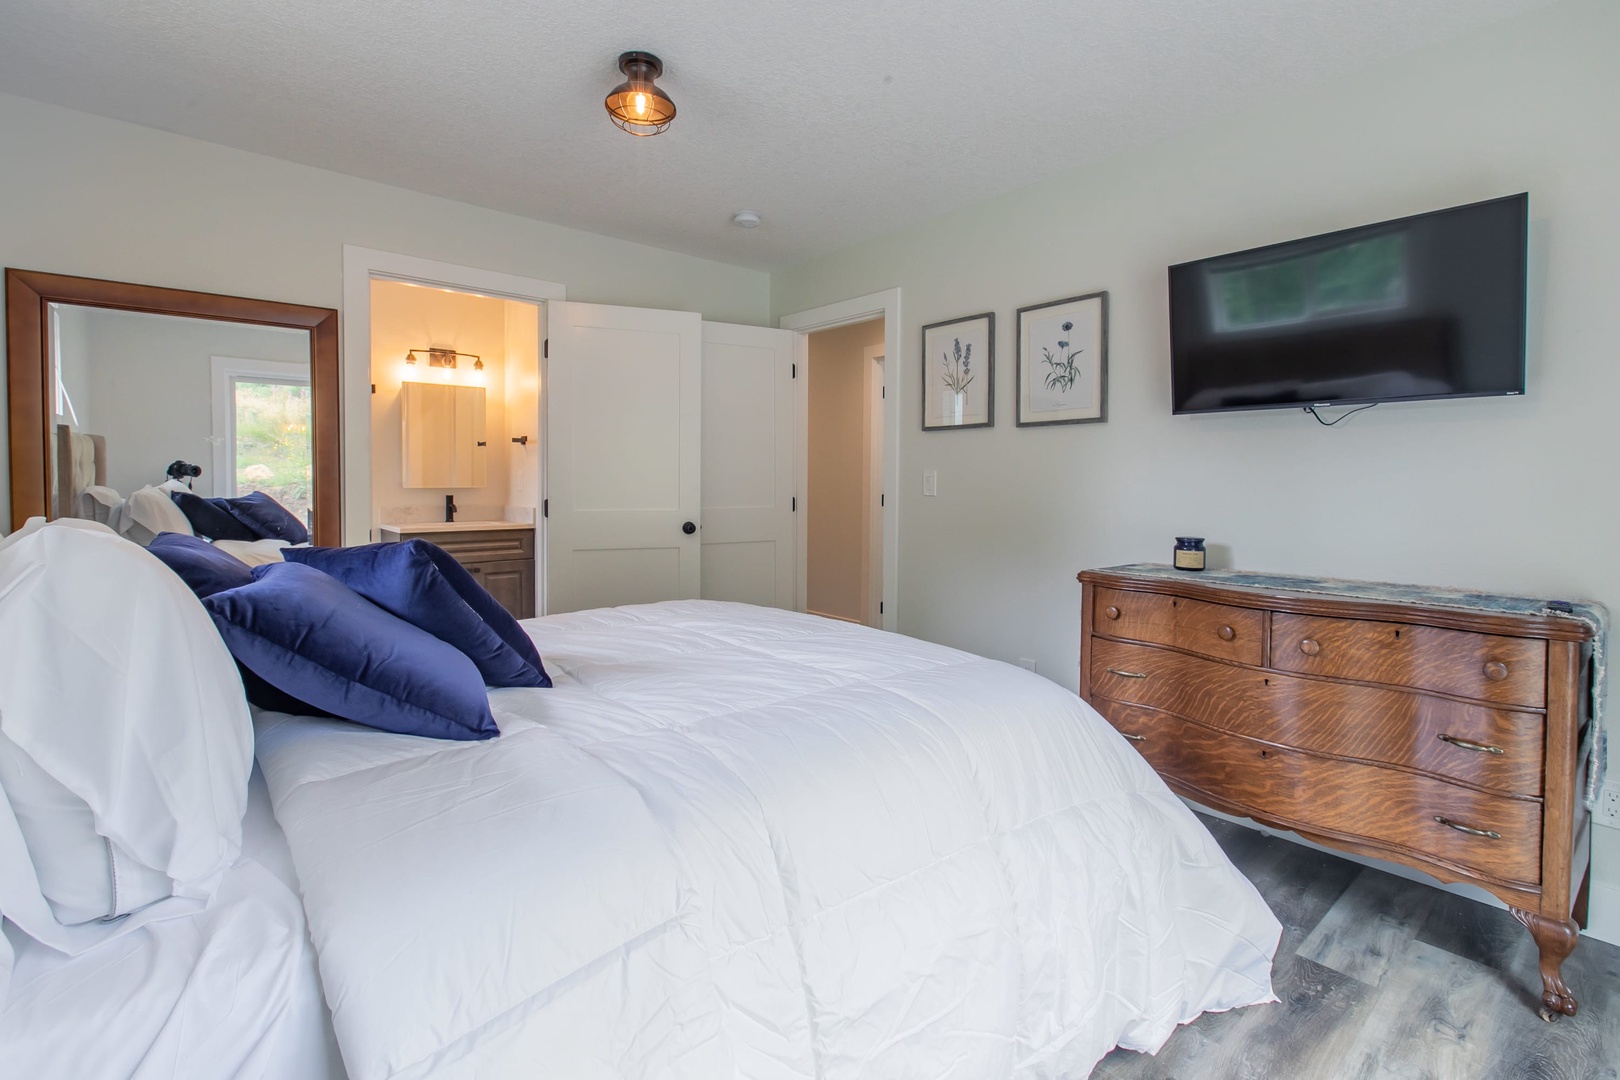 Nehalem Vacation Rentals, Nehalem Coastal Oasis - There are two additional air mattresses are in the bedroom closet to accommodate other guests if needed.